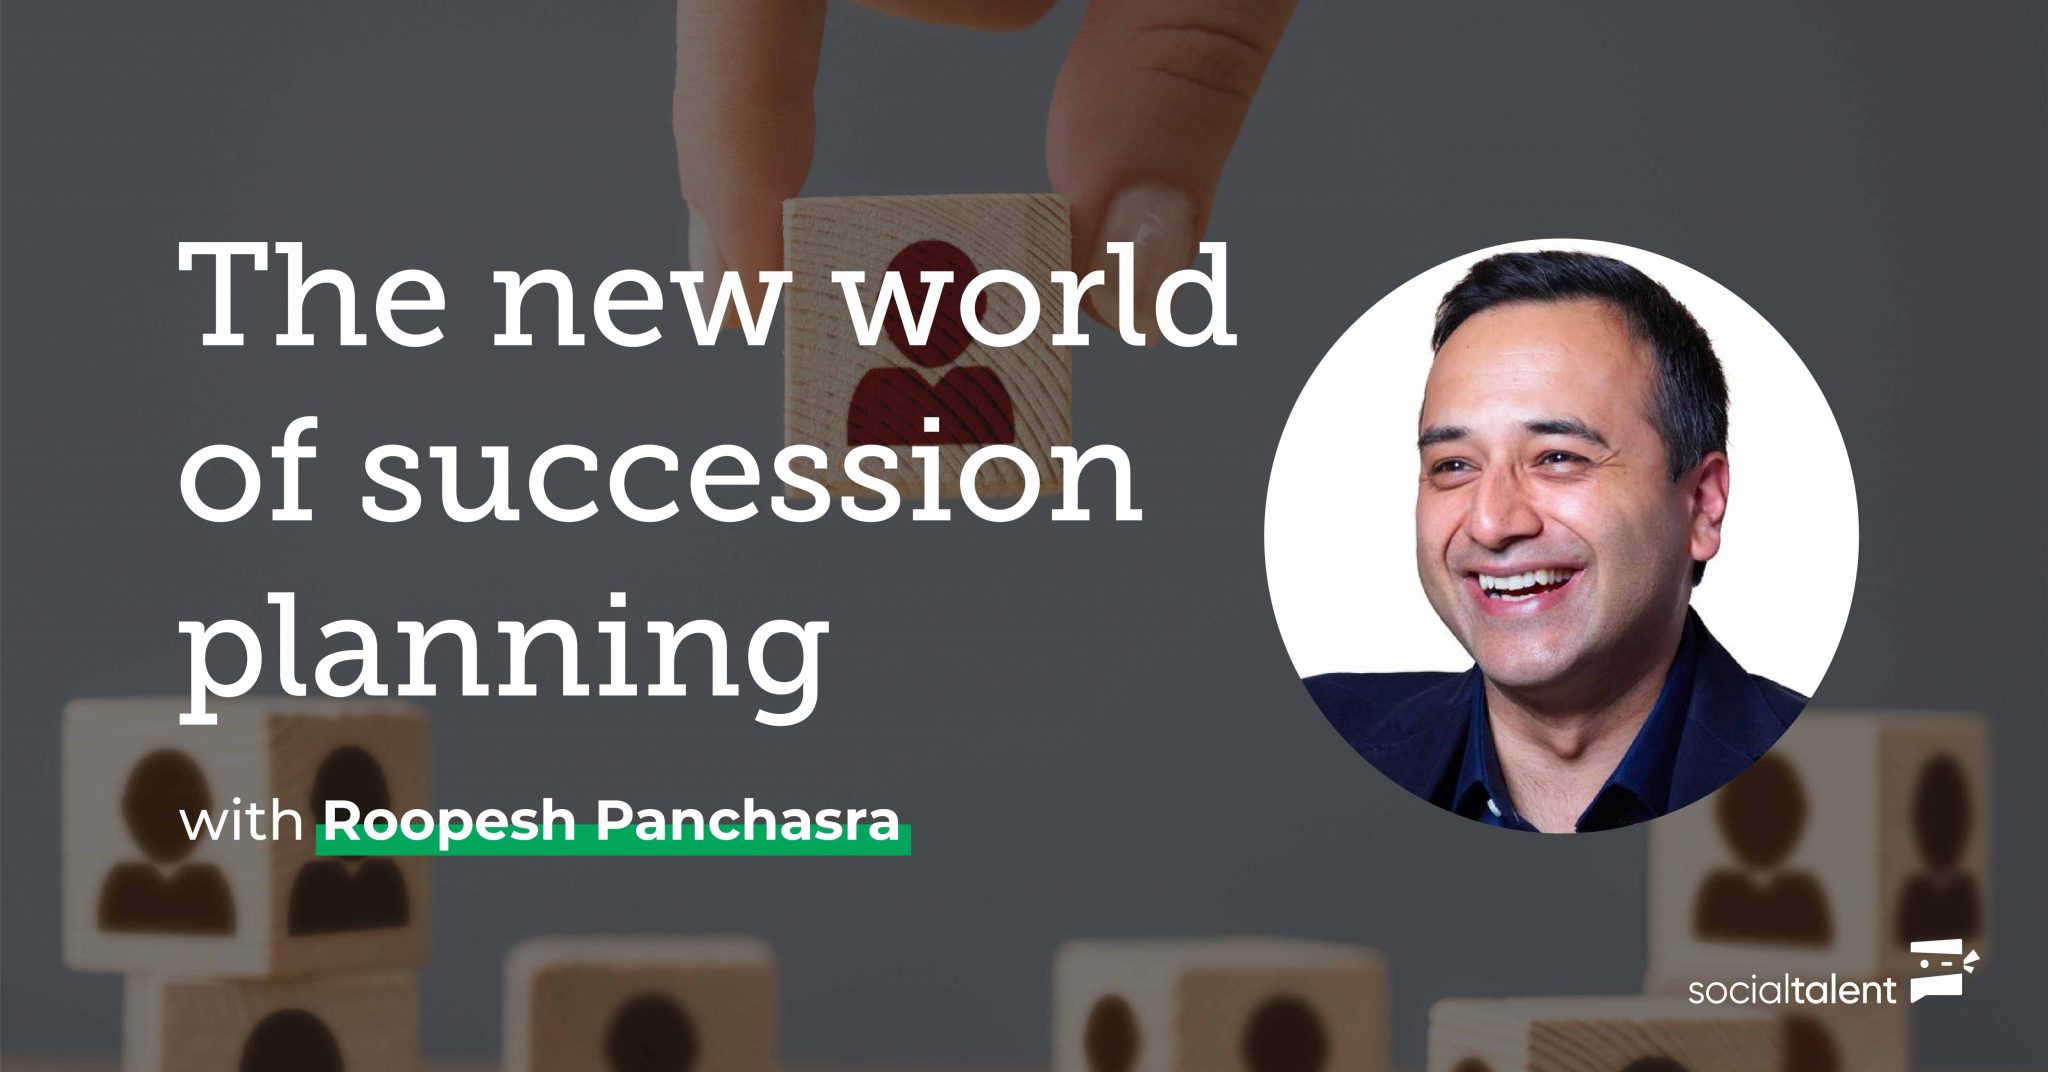 The new world of succession planning, with Roopesh Panchasra